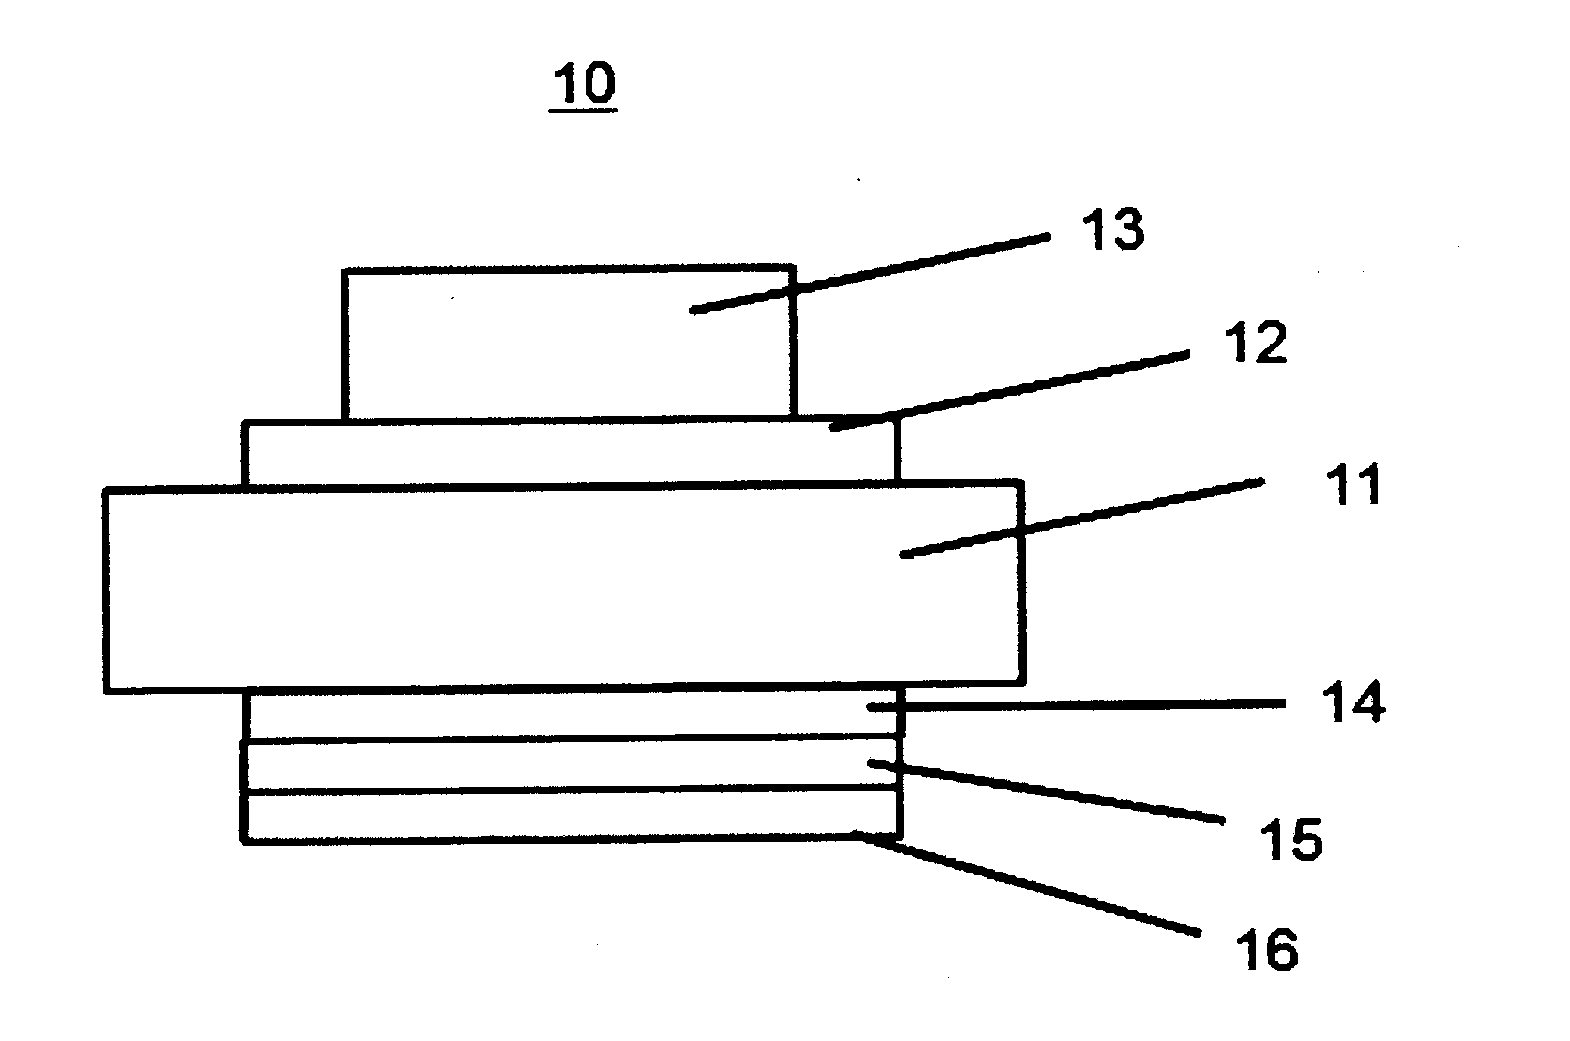 Oxide semiconductor substrate and schottky barrier diode